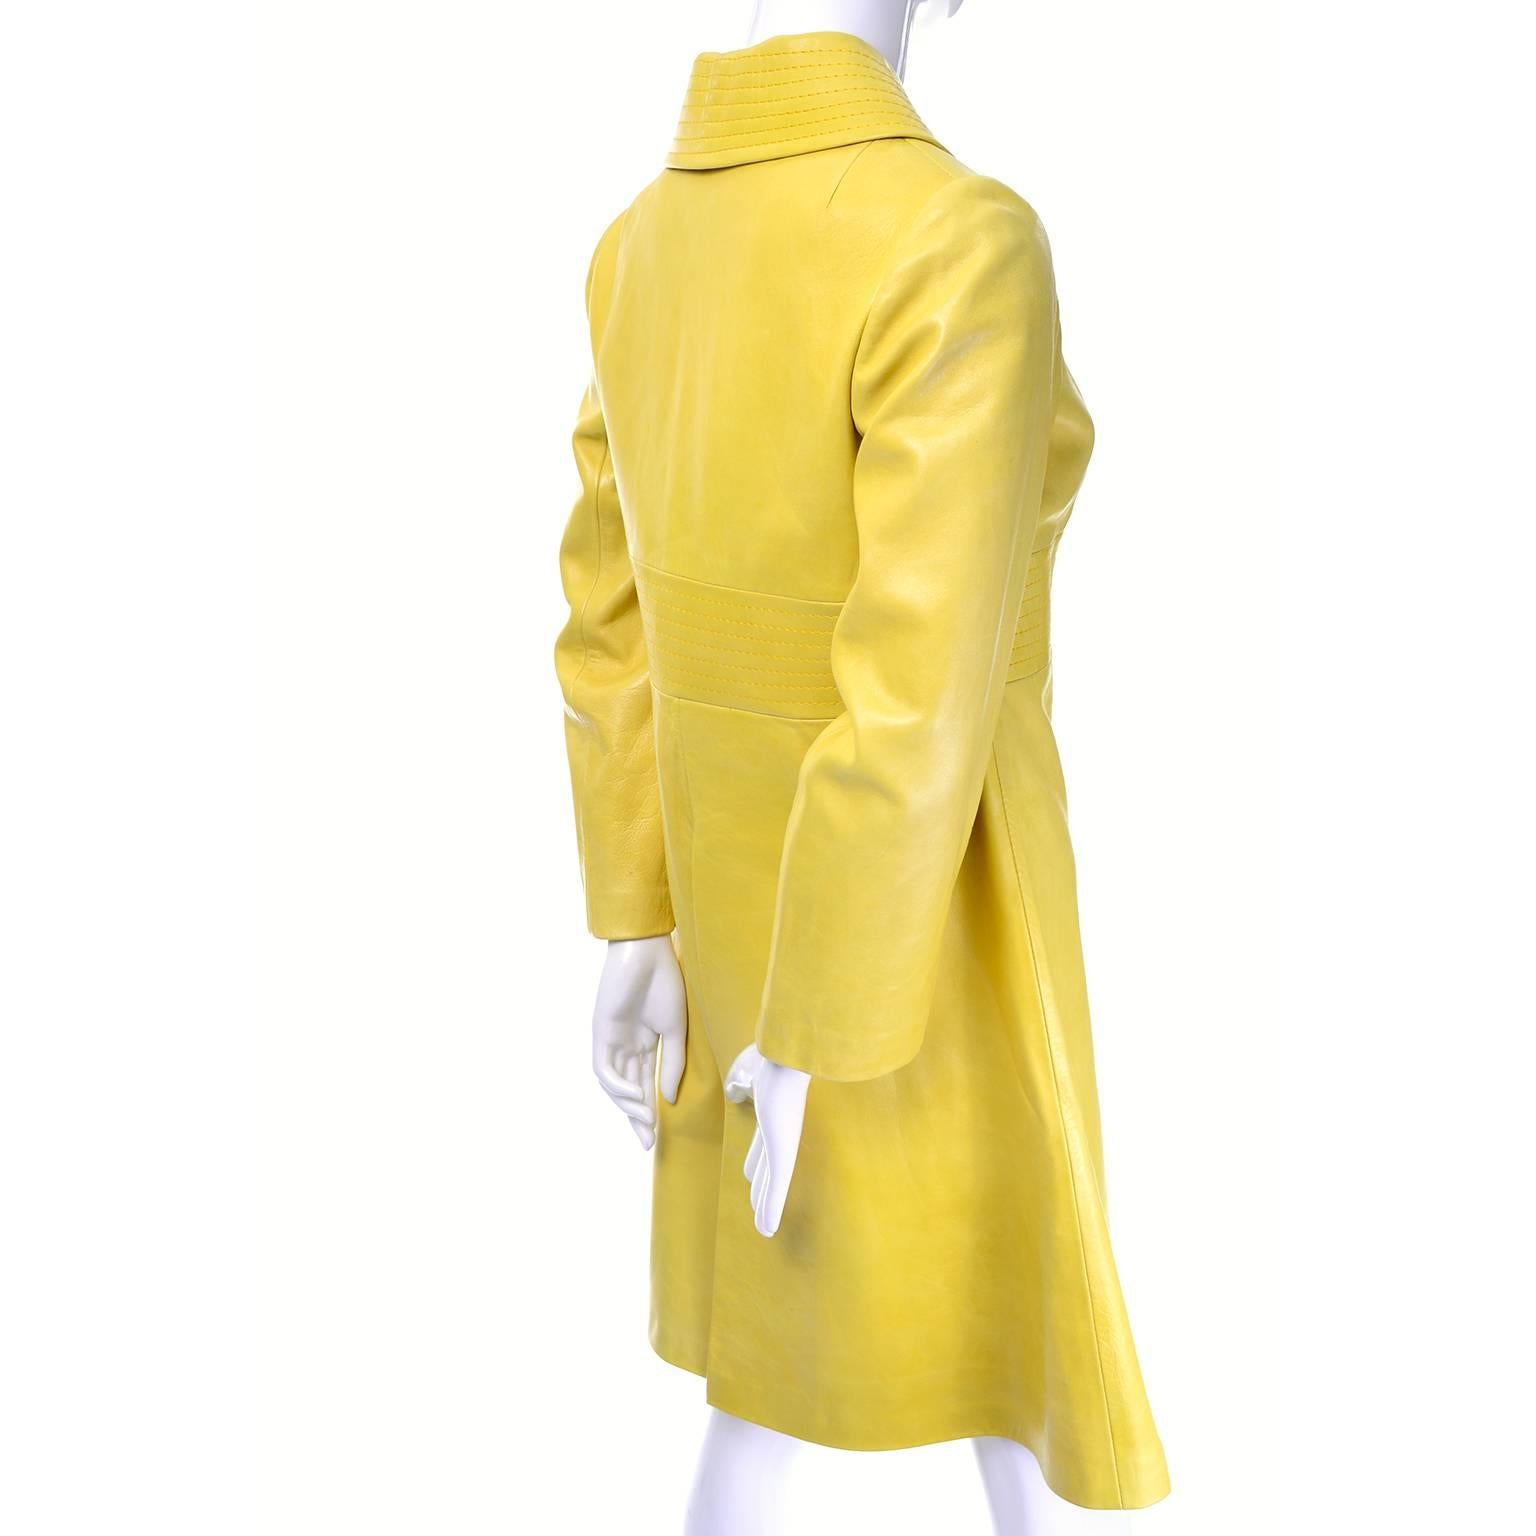 This is an exceptional vintage 1960's yellow leather coat! The coat is fully lined and has great square leather buttons. The approximate size is a 2/4 and other than a pin dot spot on the lining, it is in excellent condition. There is a center pleat